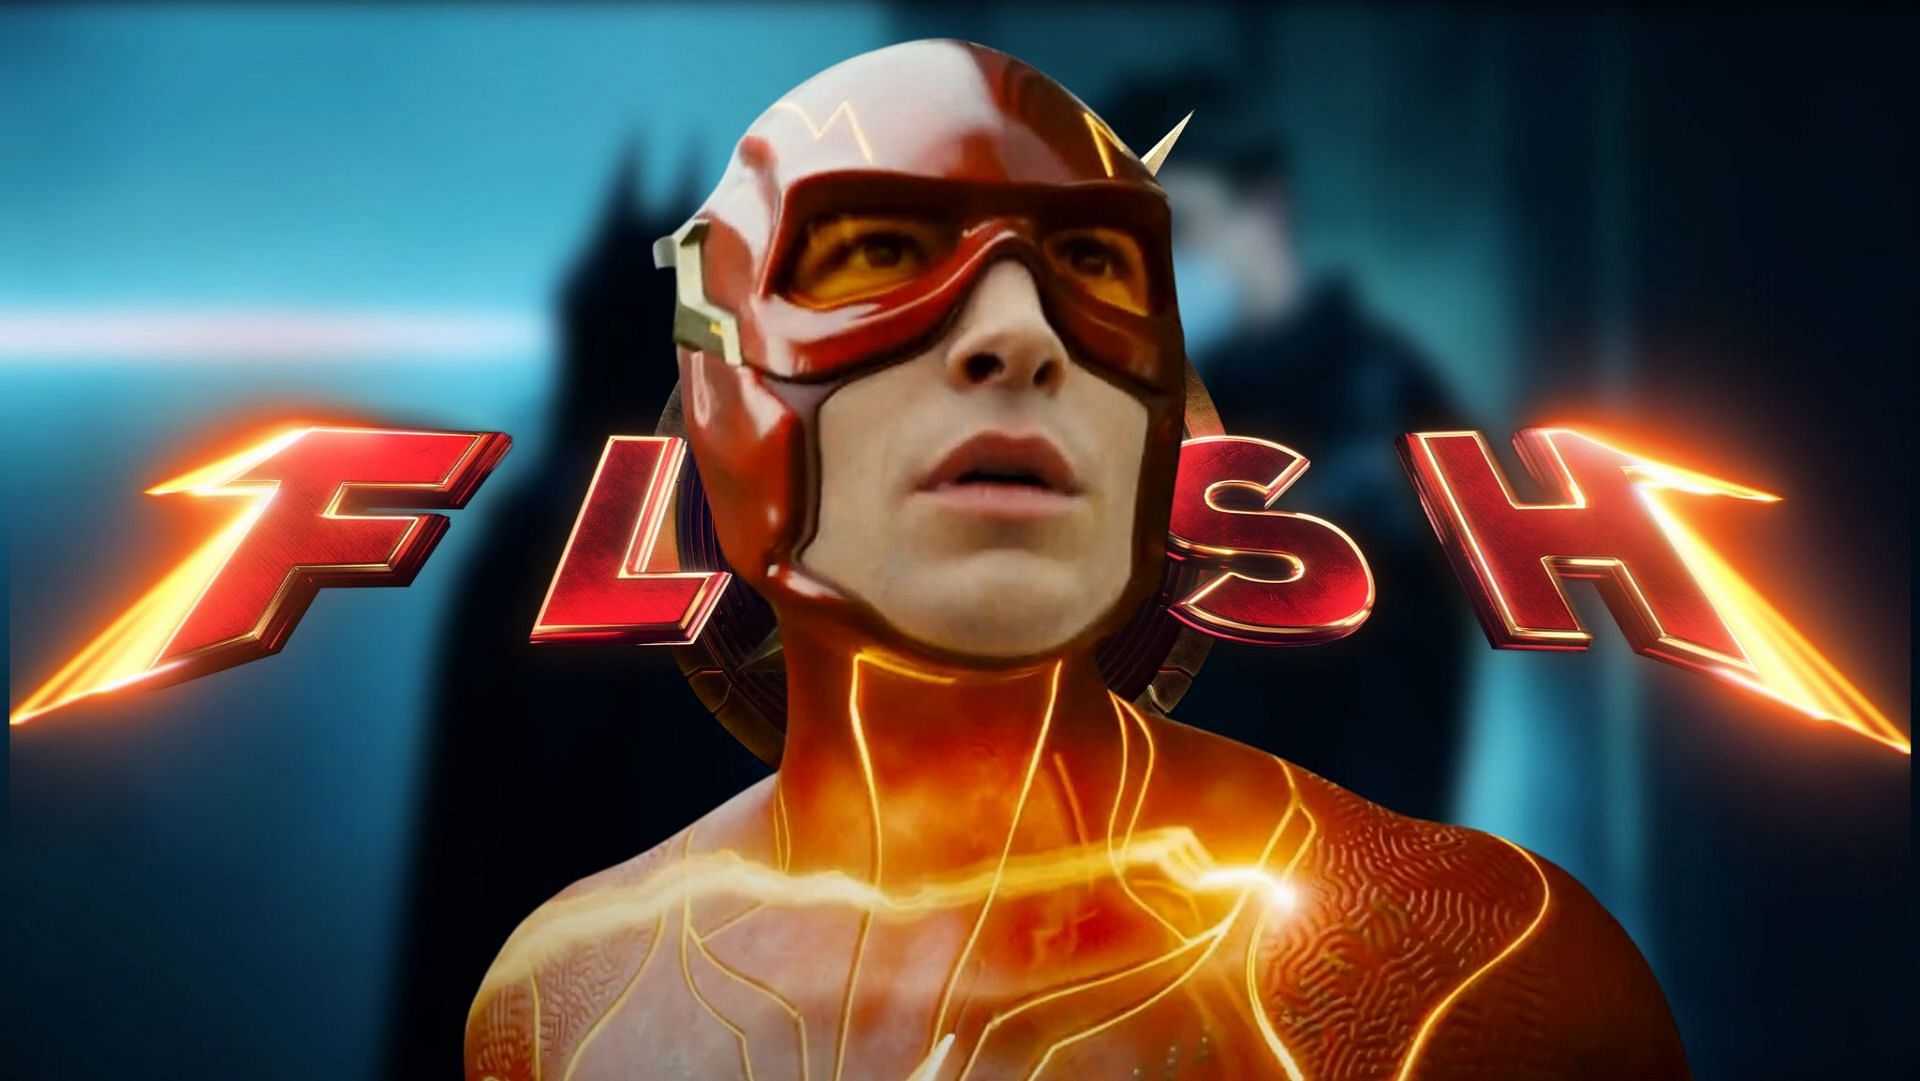 Prepare for jaw-dropping twists and exciting cameos in The Flash